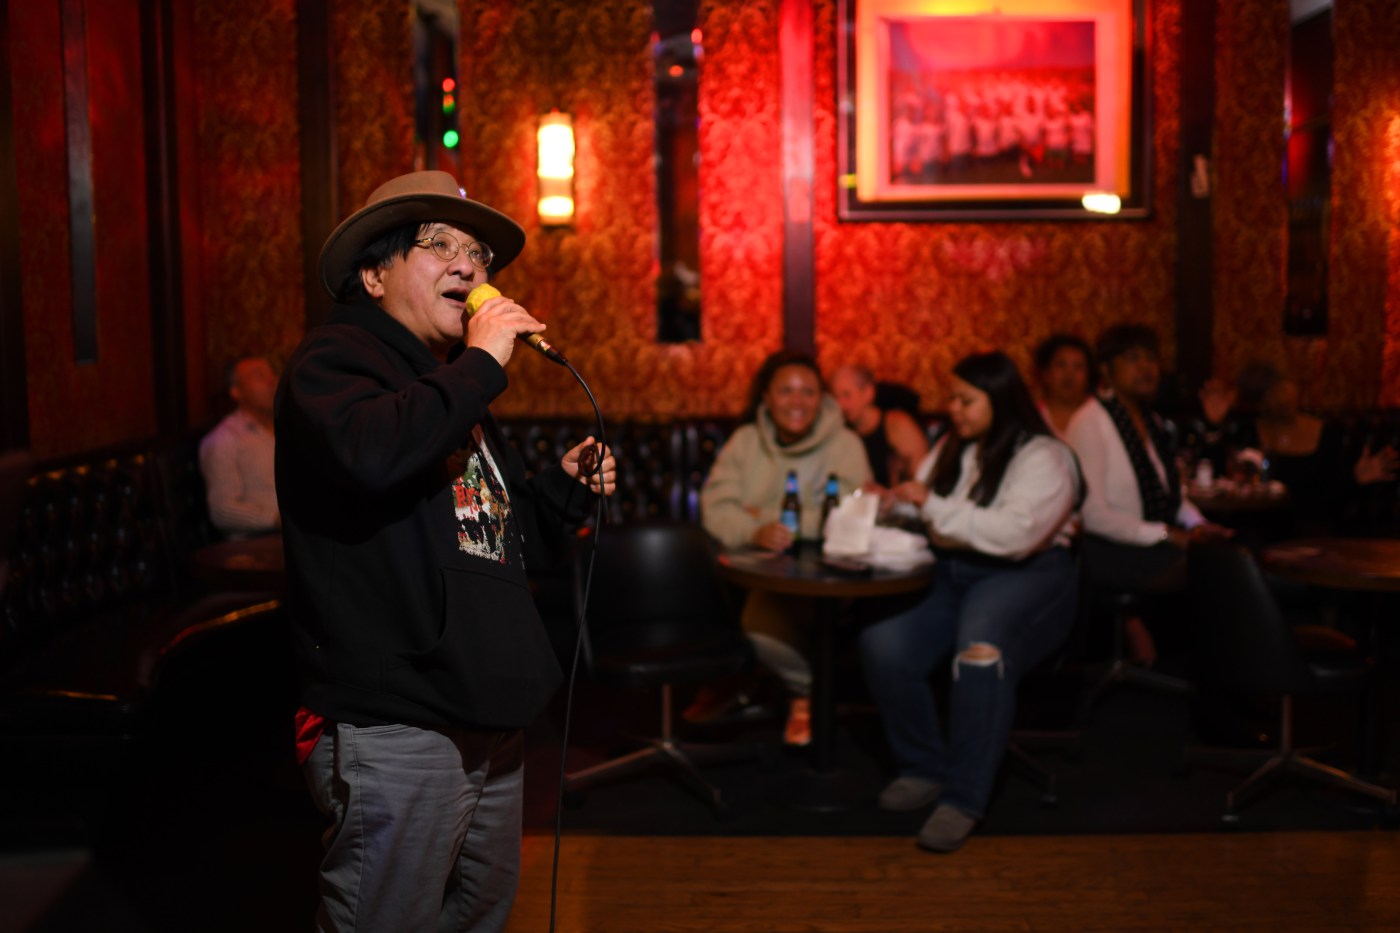 the-sublime-and-deeply-therapeutic-joys-of-karaoke-in-the-bay-area